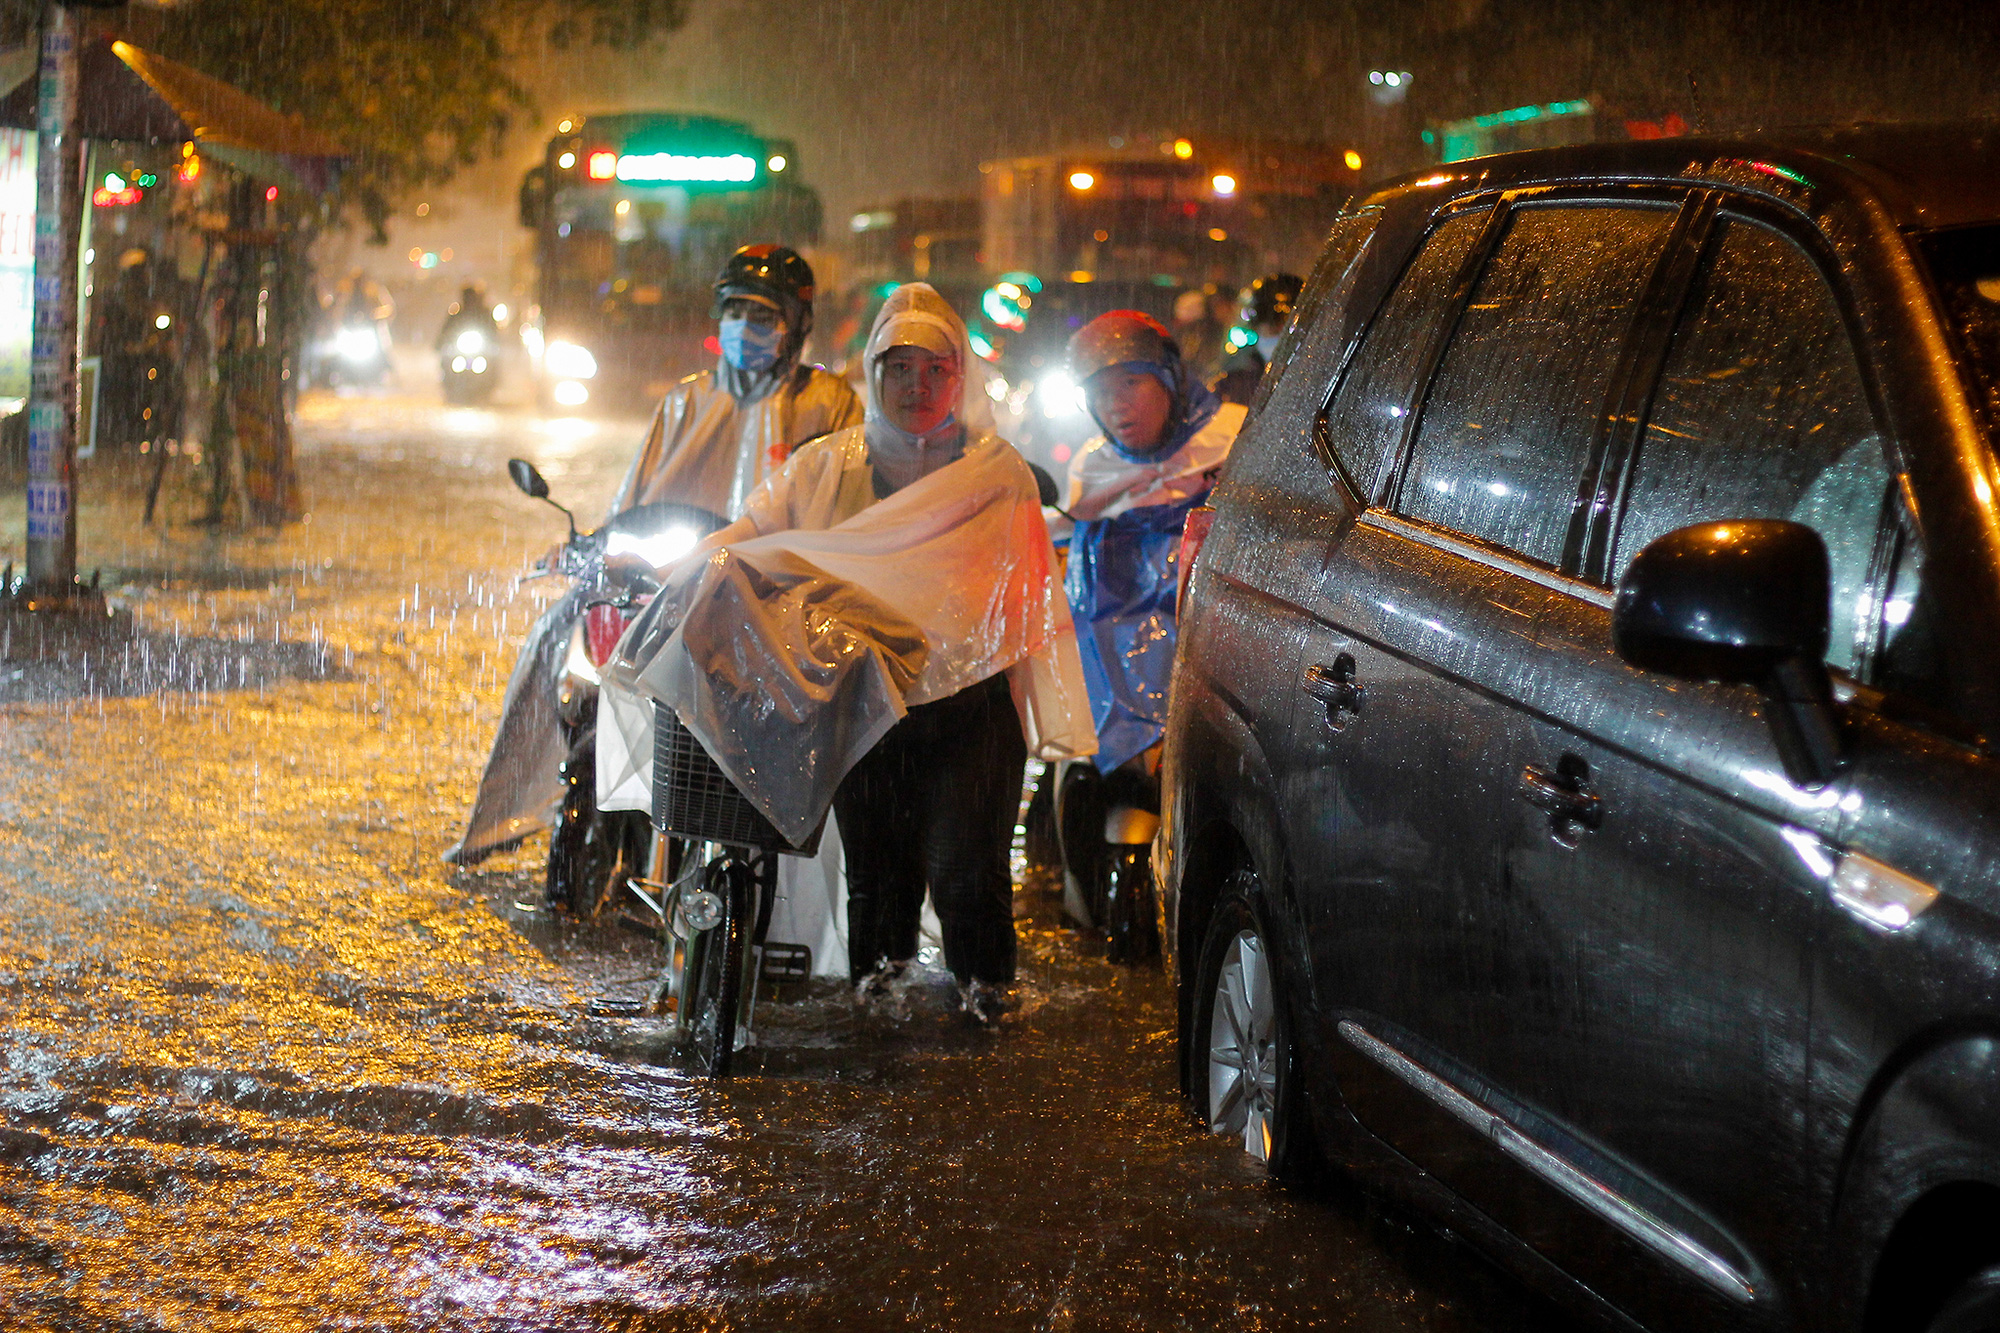 Rain to intensify in southern Vietnam over next 10 days